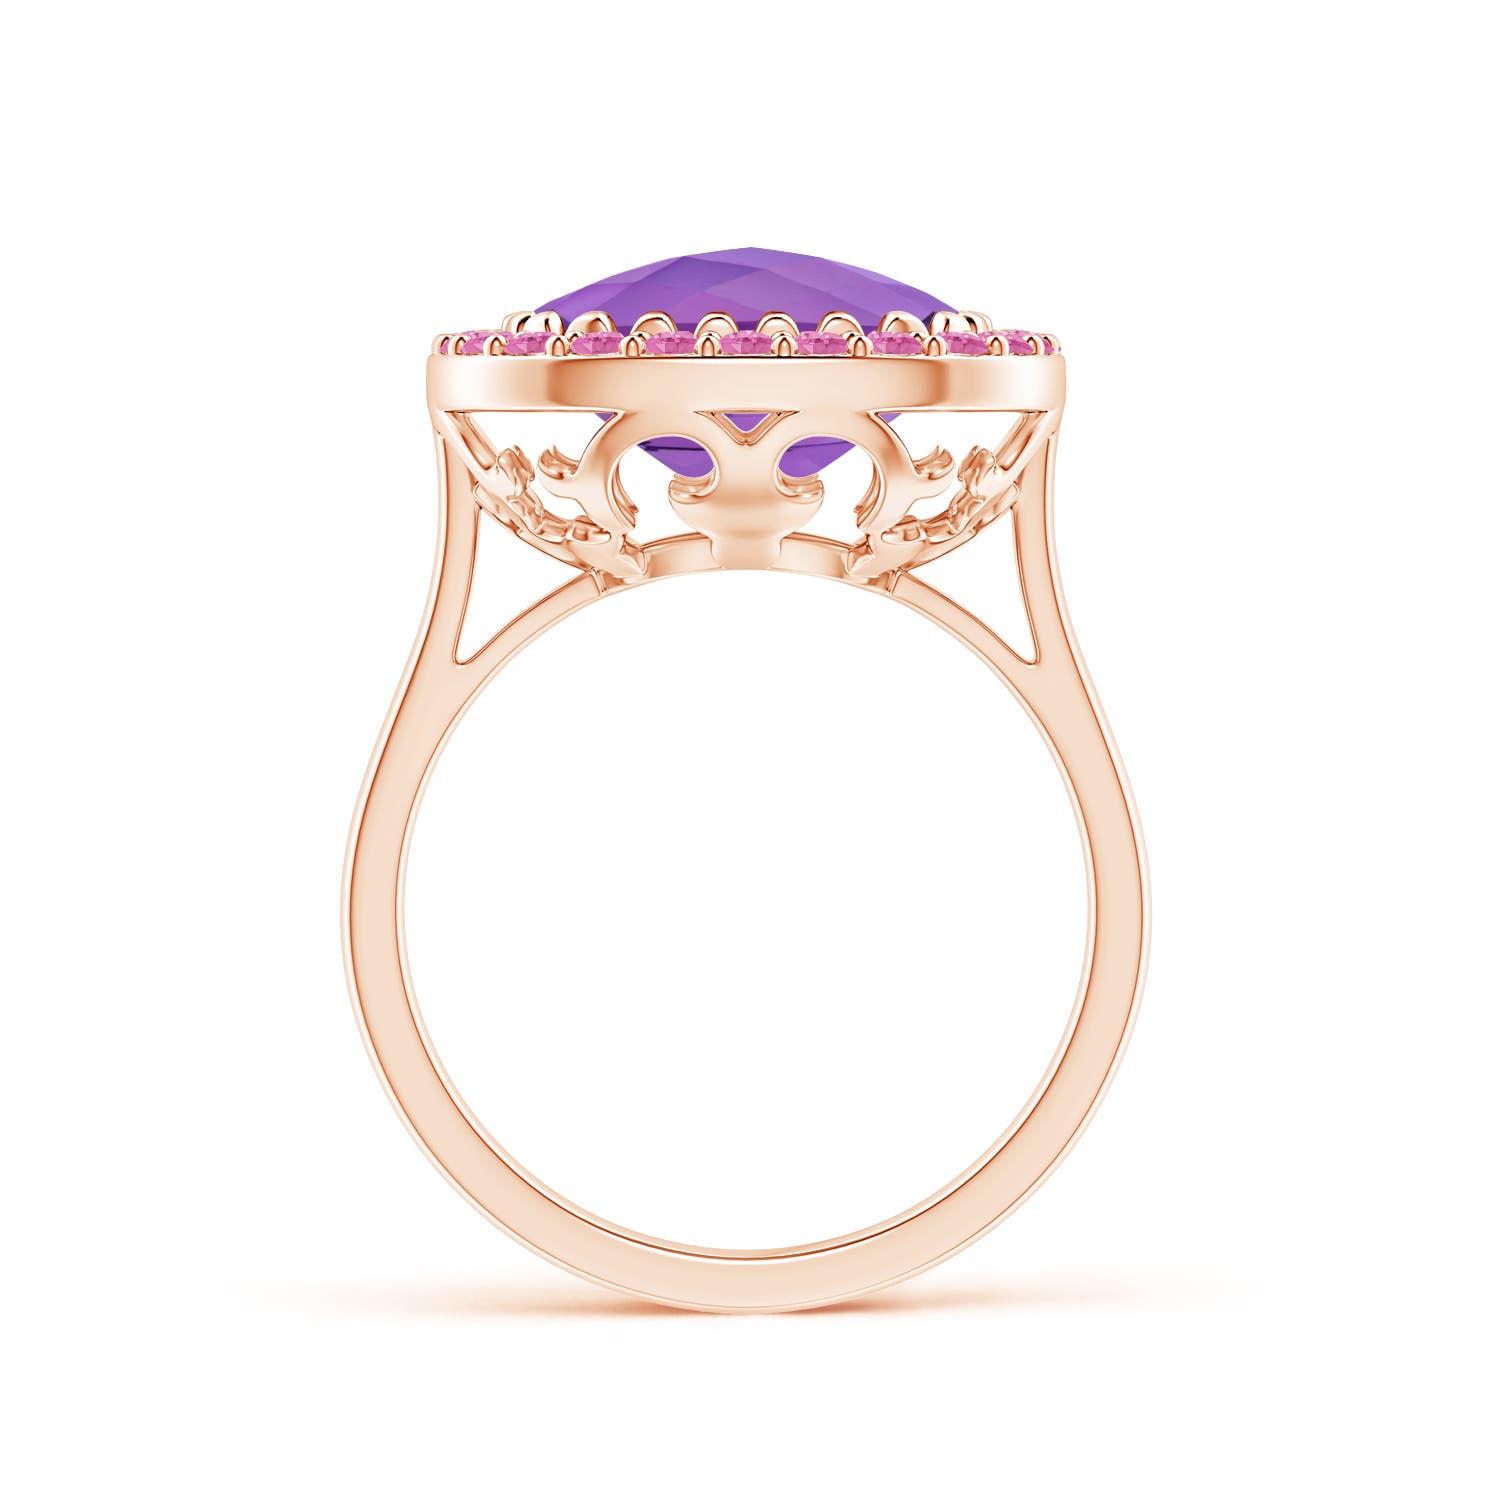 AA - Amethyst / 5.4 CT / 14 KT Rose Gold